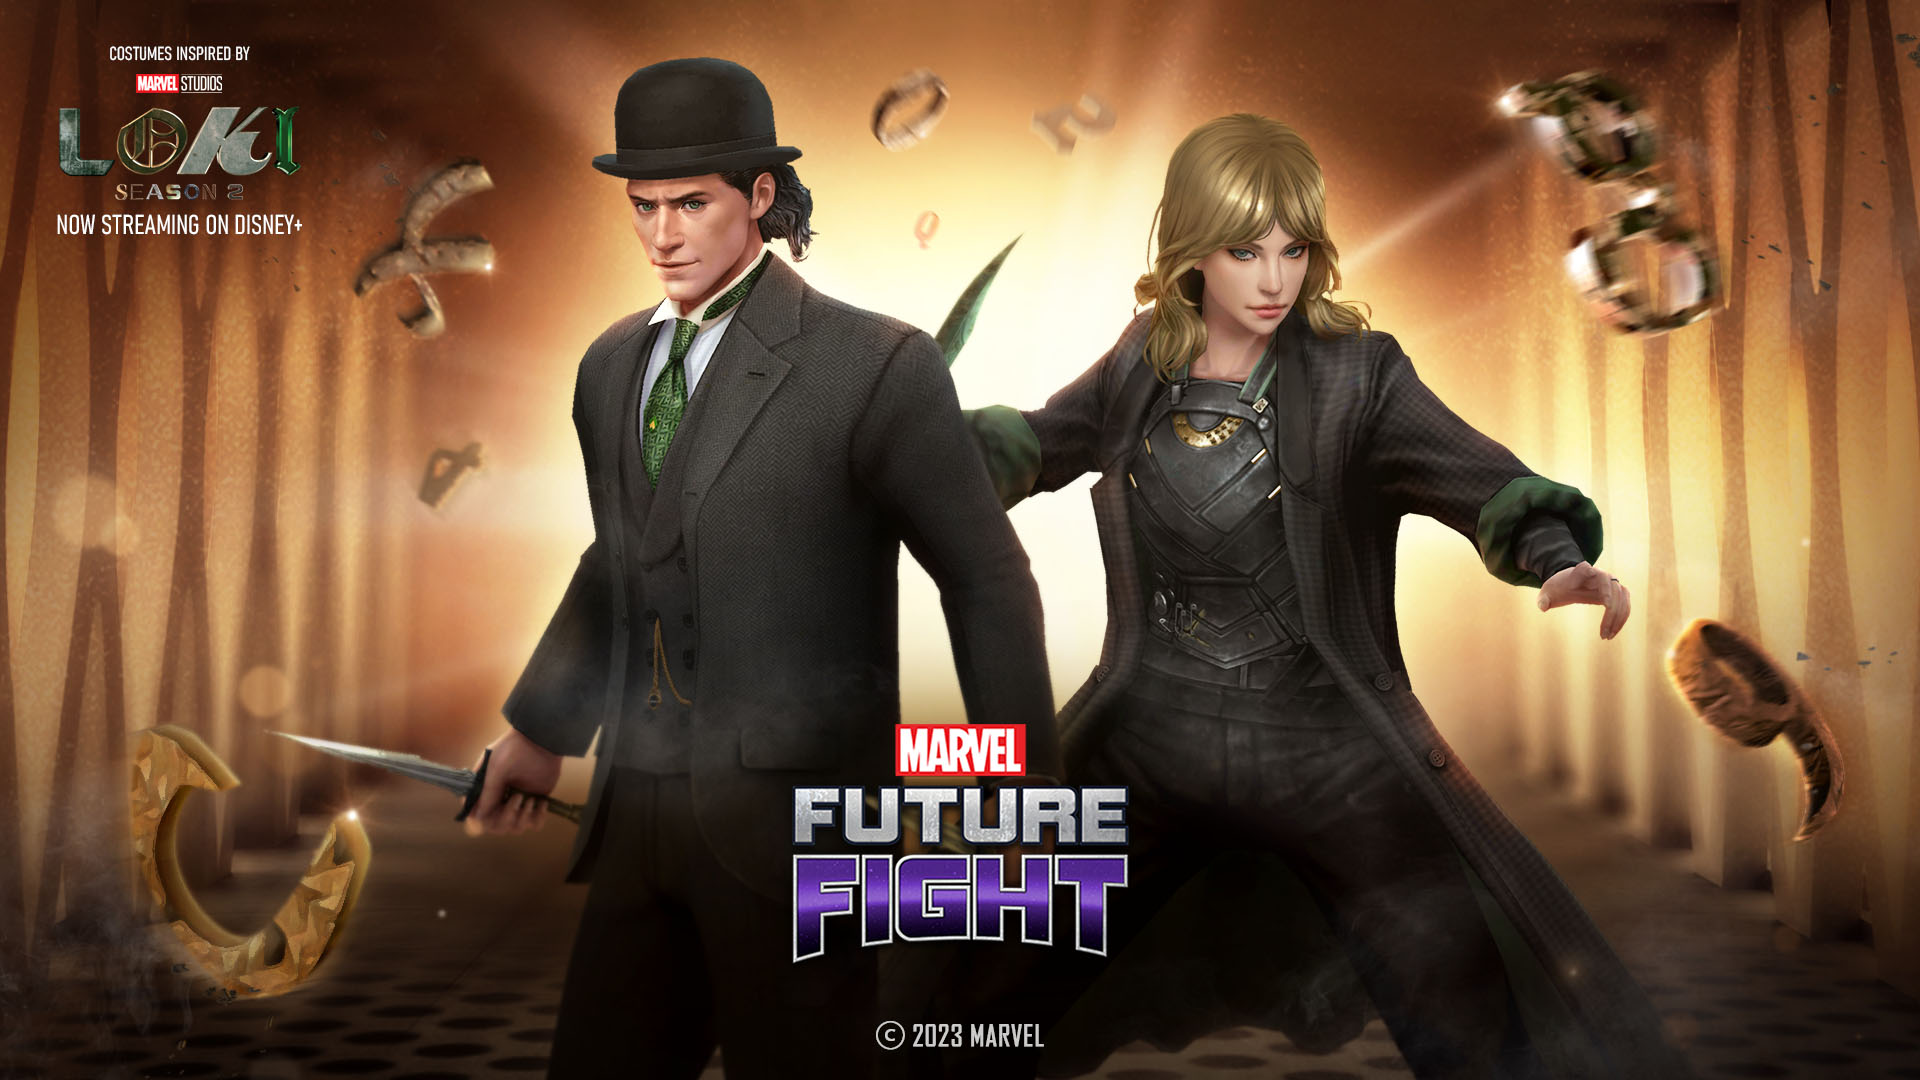 Marvel Future Fight brings content from Loki Season 2 in the